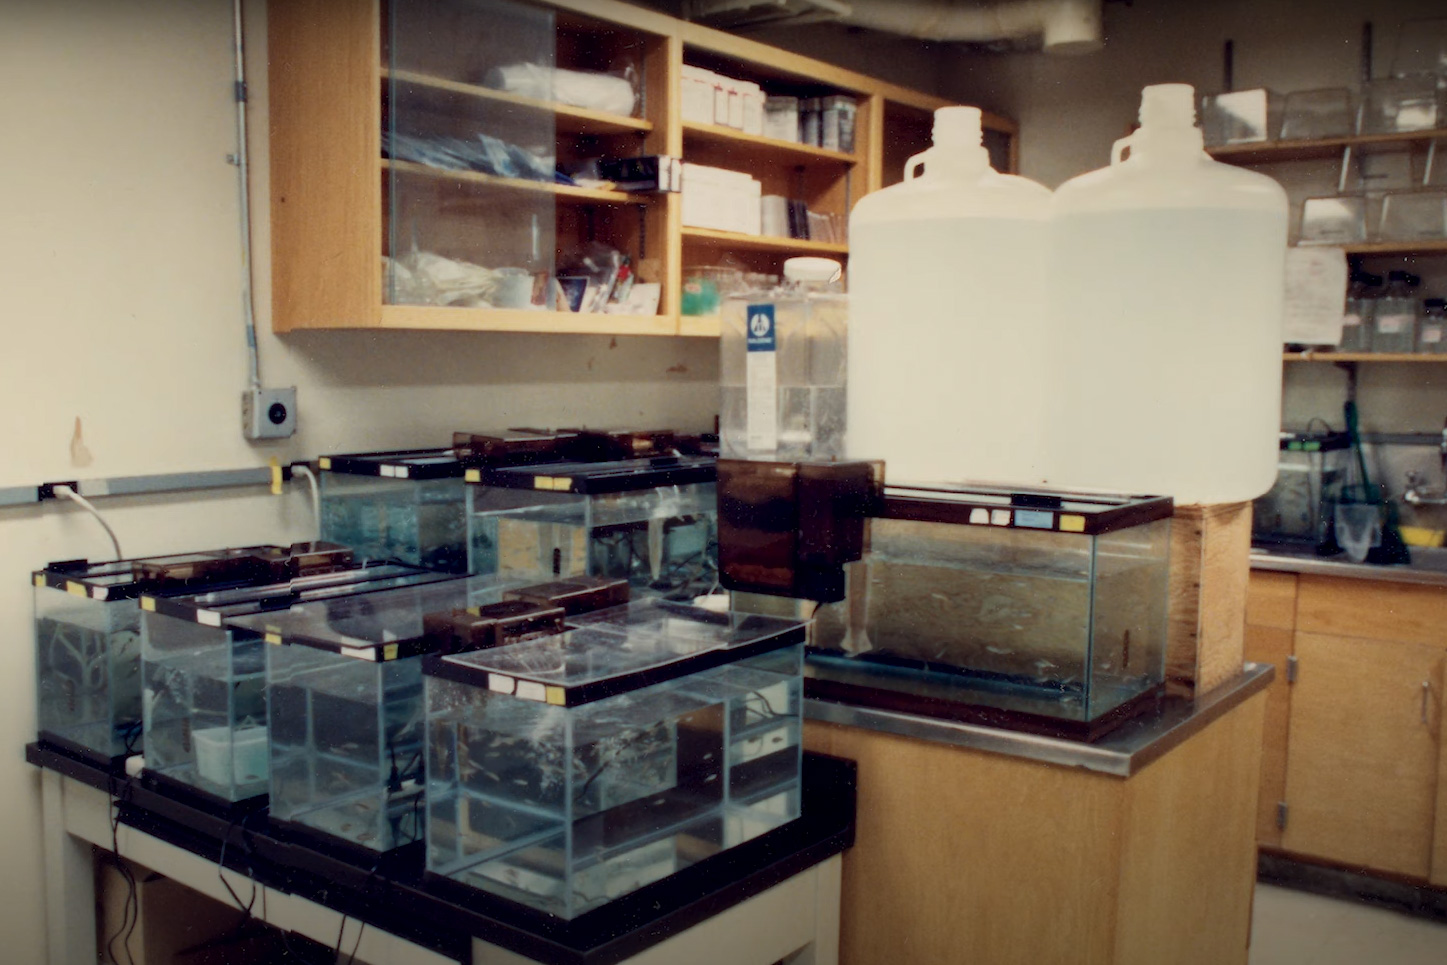 A view of Hopkins lab space showing fish tanks on every surface.